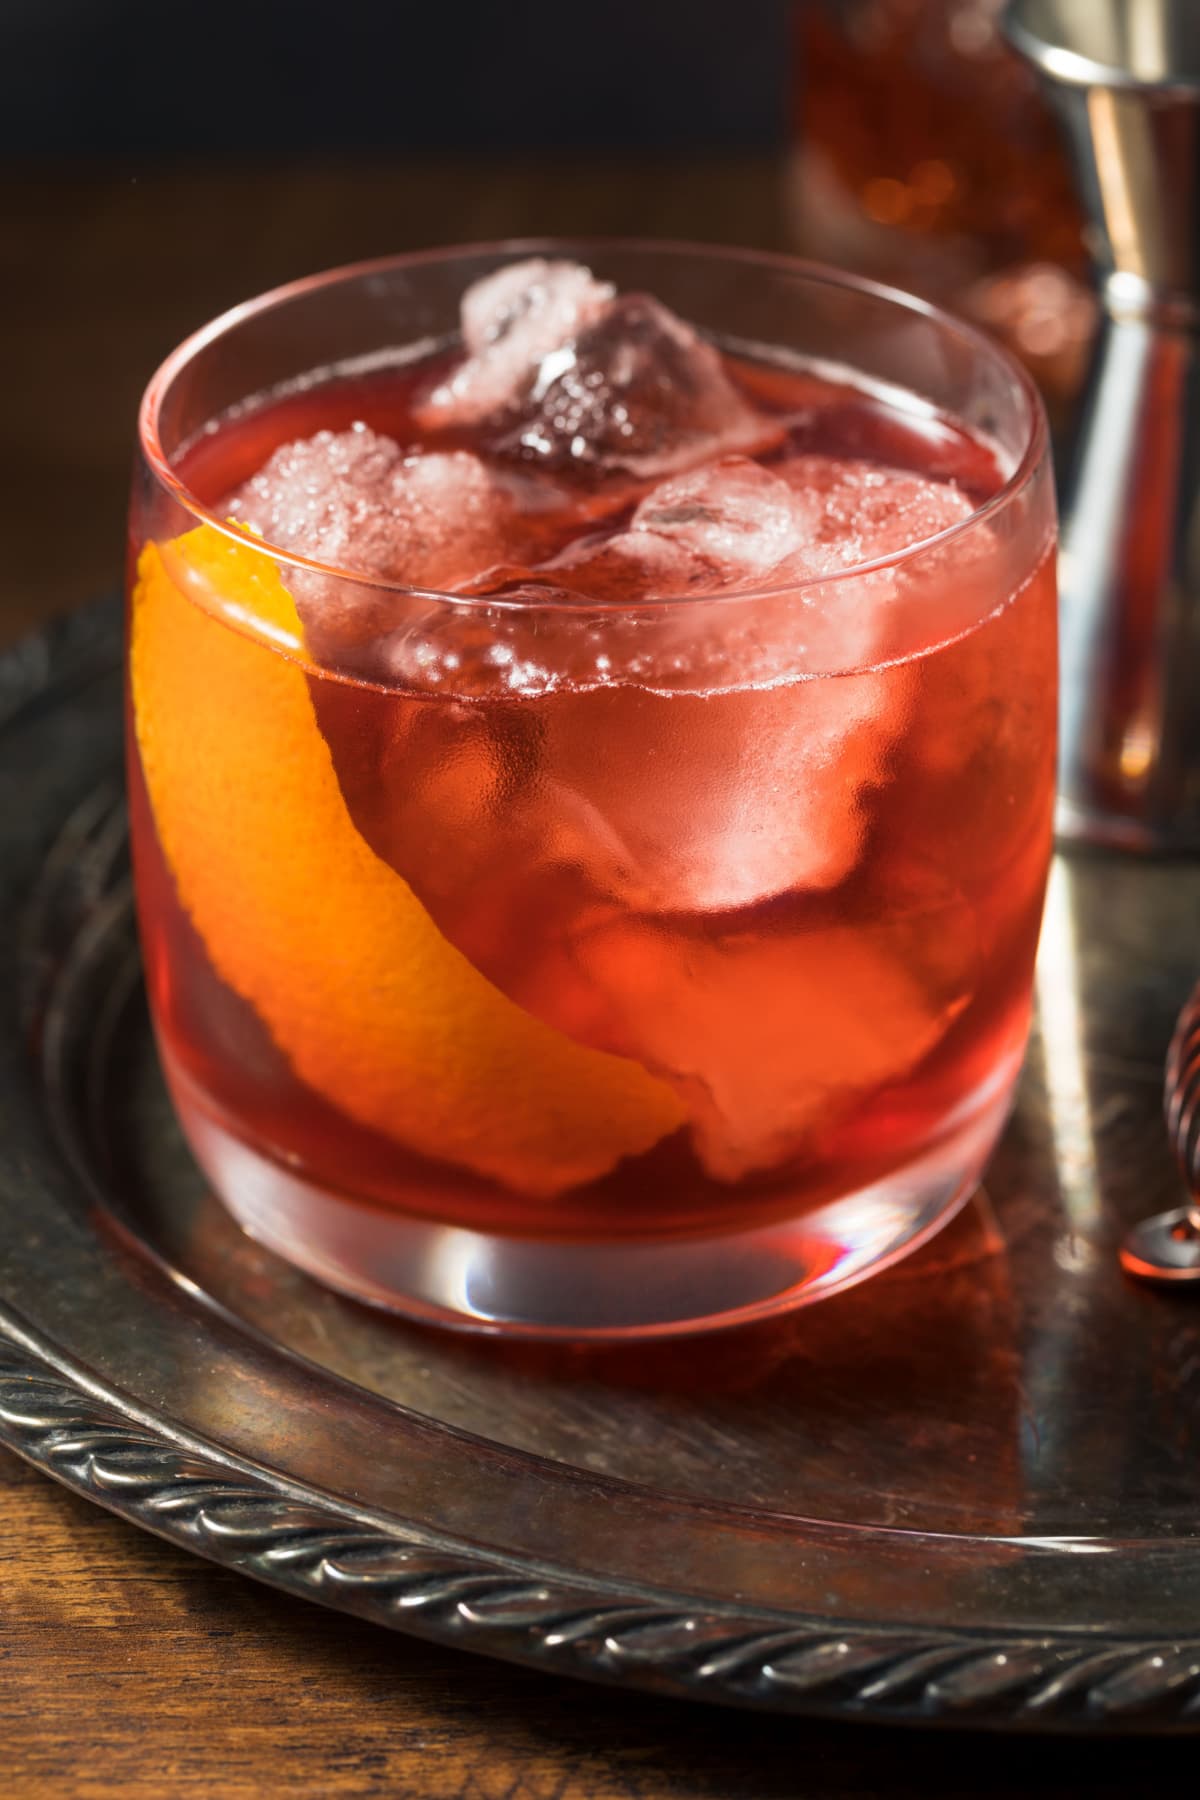 A glass of Boulevardier Cocktail with ice garnished with lemon peel.